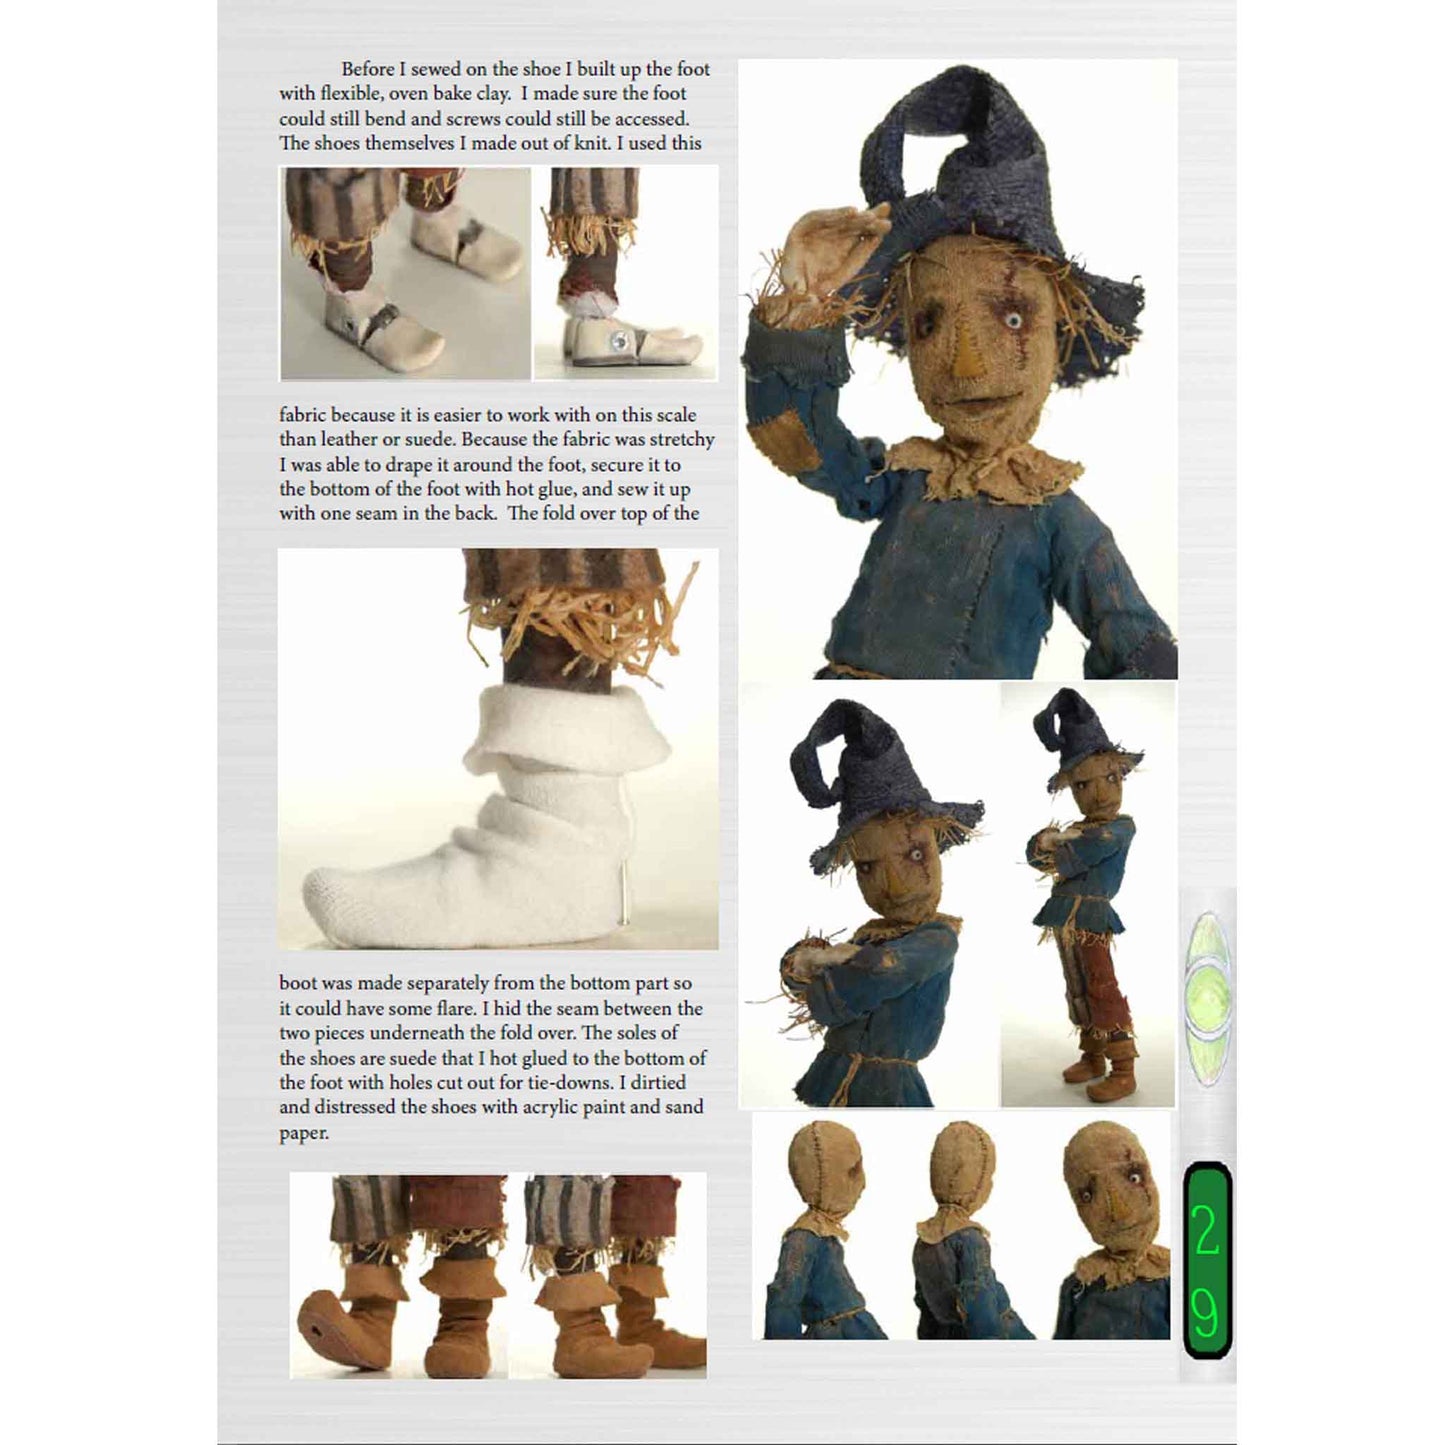 A page from one of the Psycho Styrene Magazine 13 PDF Packs showing a stop motion puppet of a scarecrow.